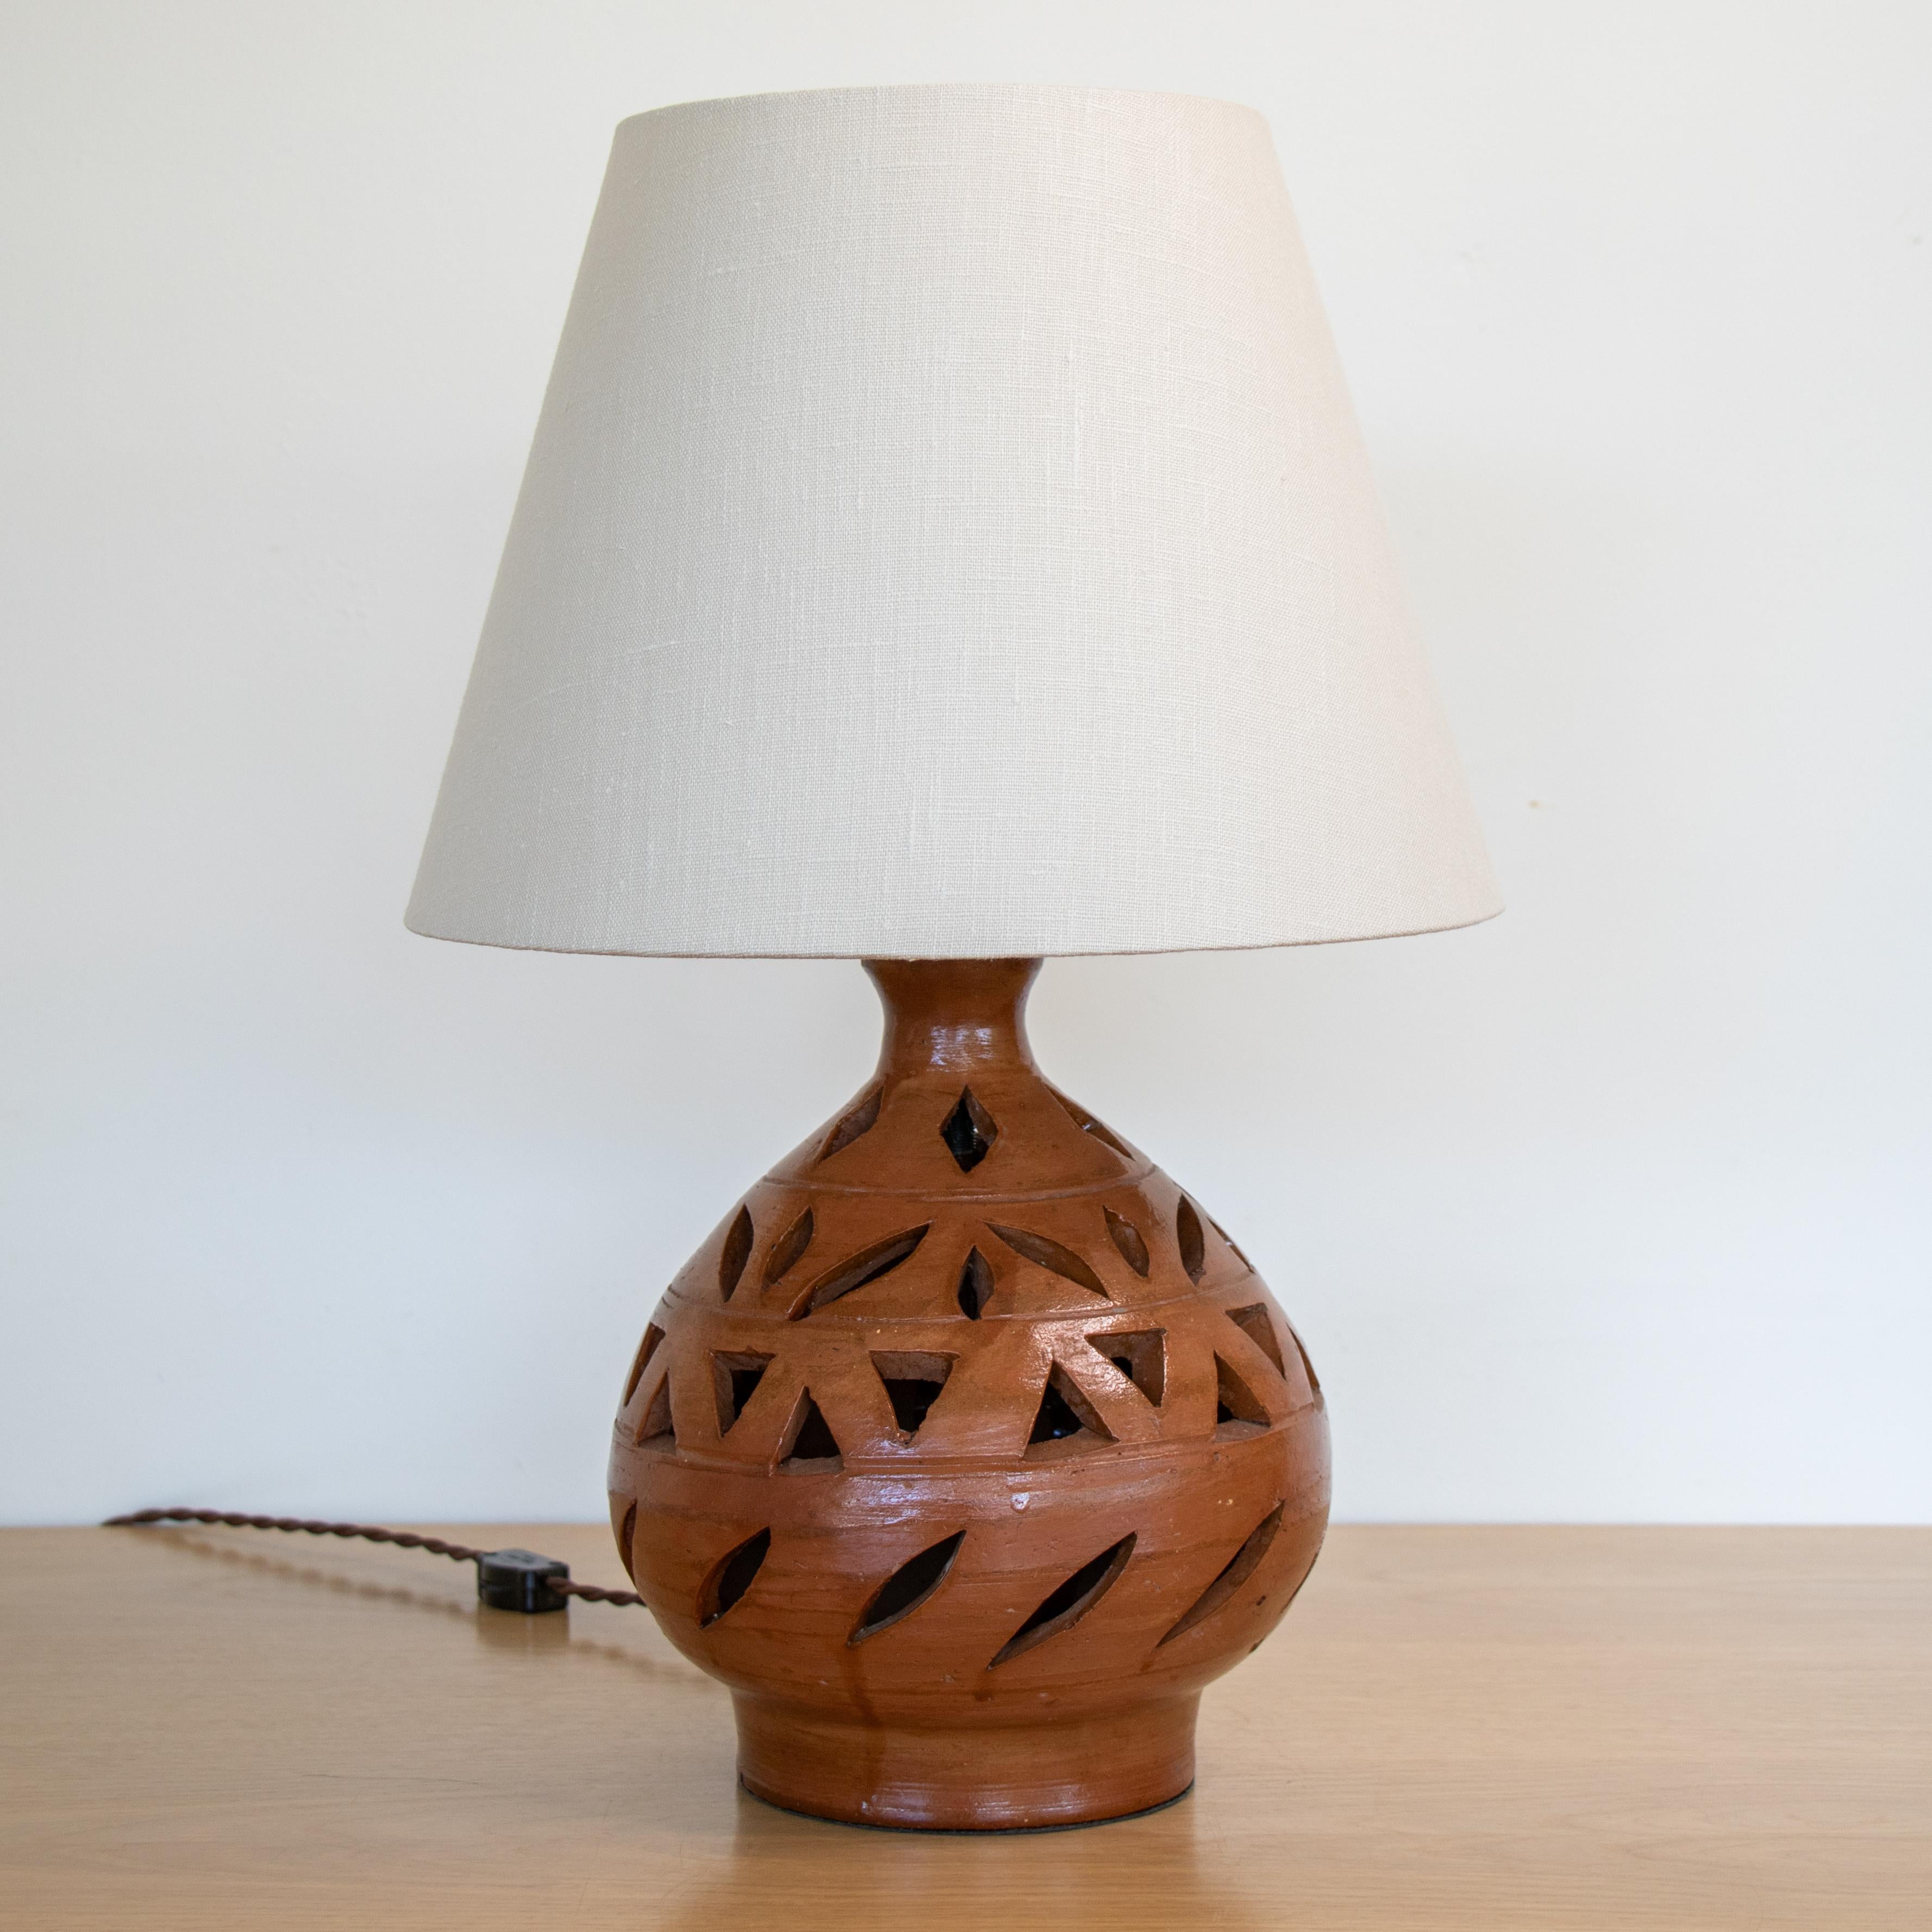 Unique vintage terracotta table lamp from France, 1950's. Jug shape base made of red terracotta with decorative cut outs throughout. Newly rewired and new tapered linen shade. Base measures 9